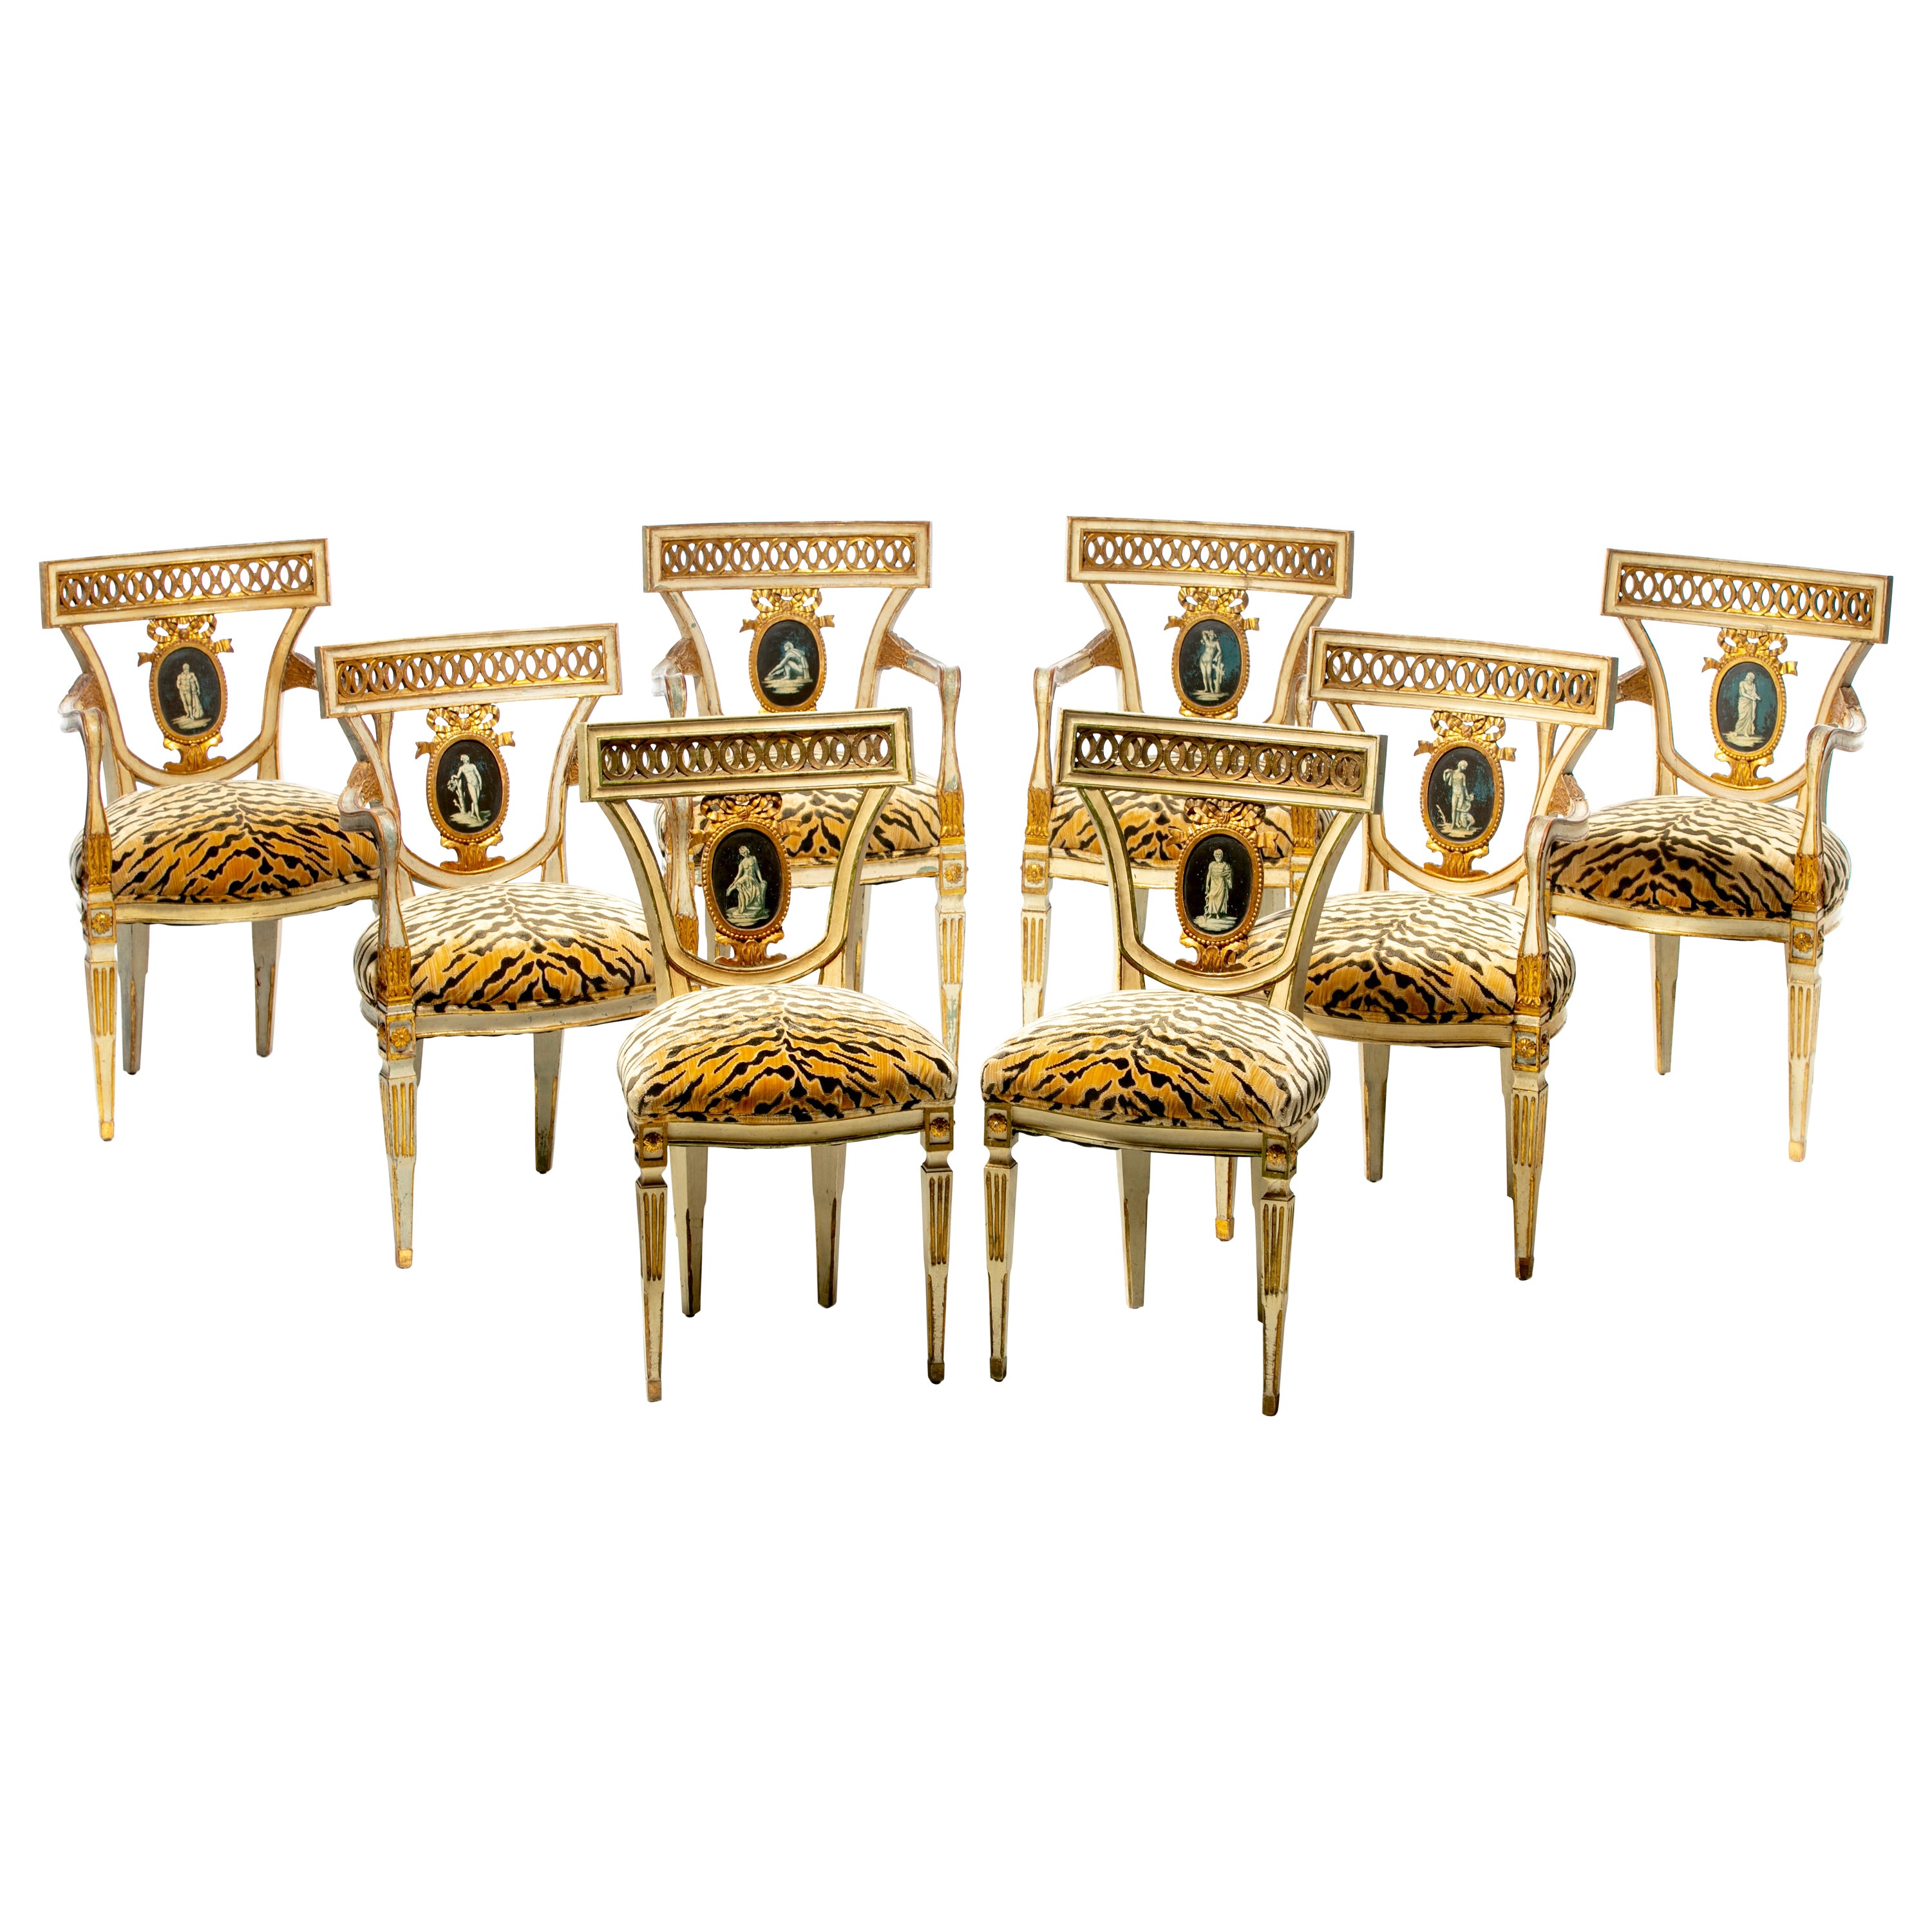 Set of 8 Italian Neoclassical Dining Chairs with Painted Murals & Tiger Velvet For Sale